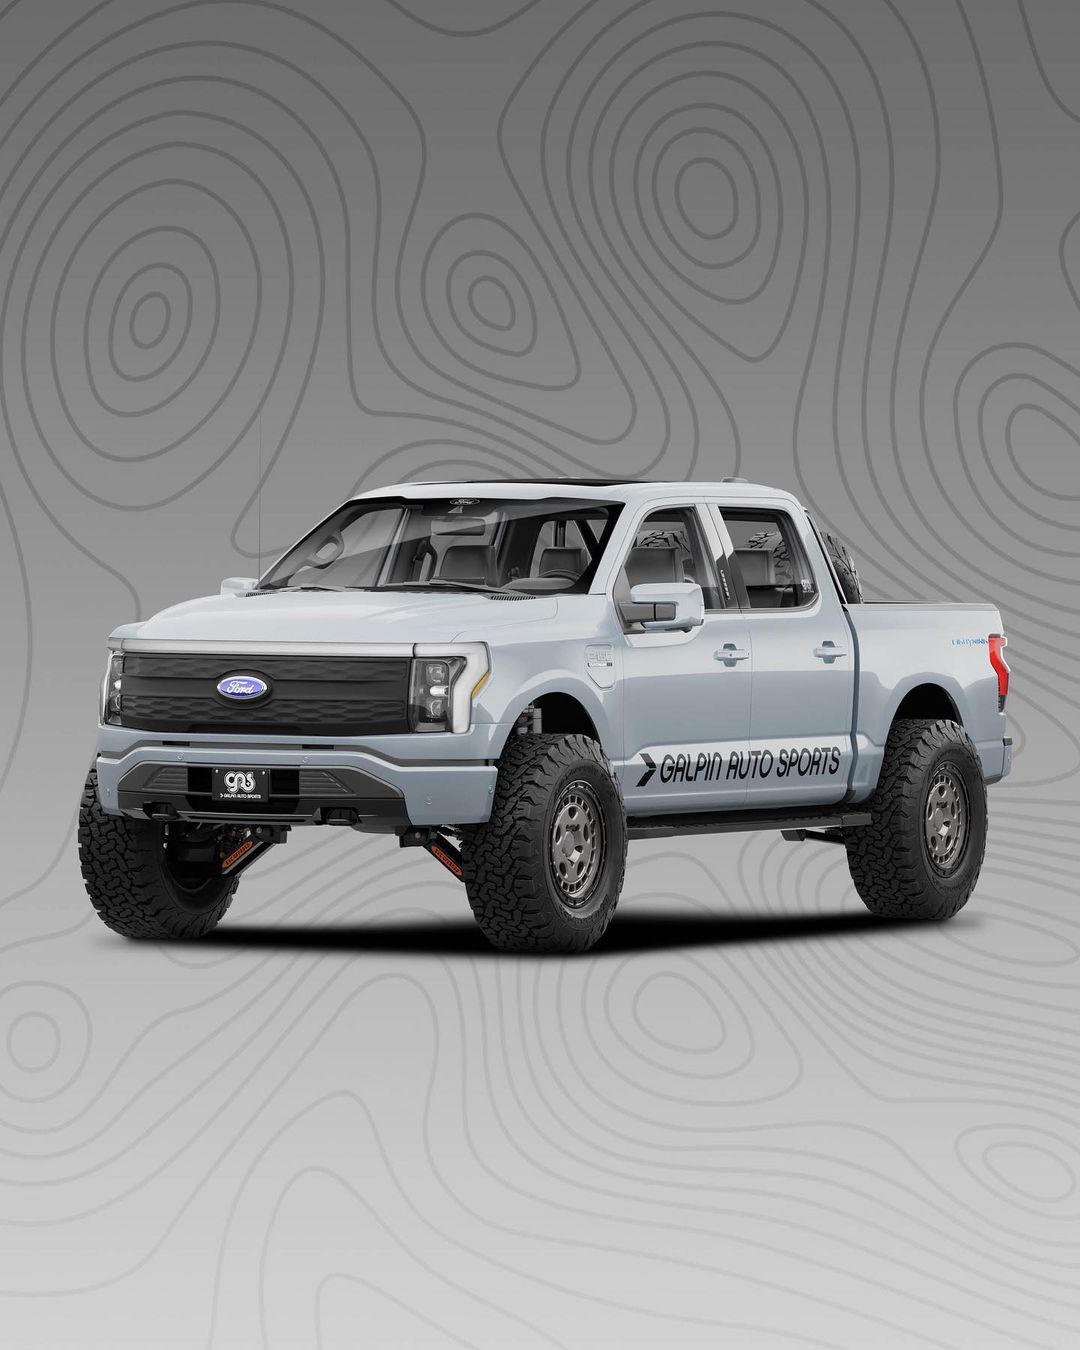 22 Ford F 150 Lighting Ev From Galpin Auto Sports Flaunts Clean Forgiato Looks